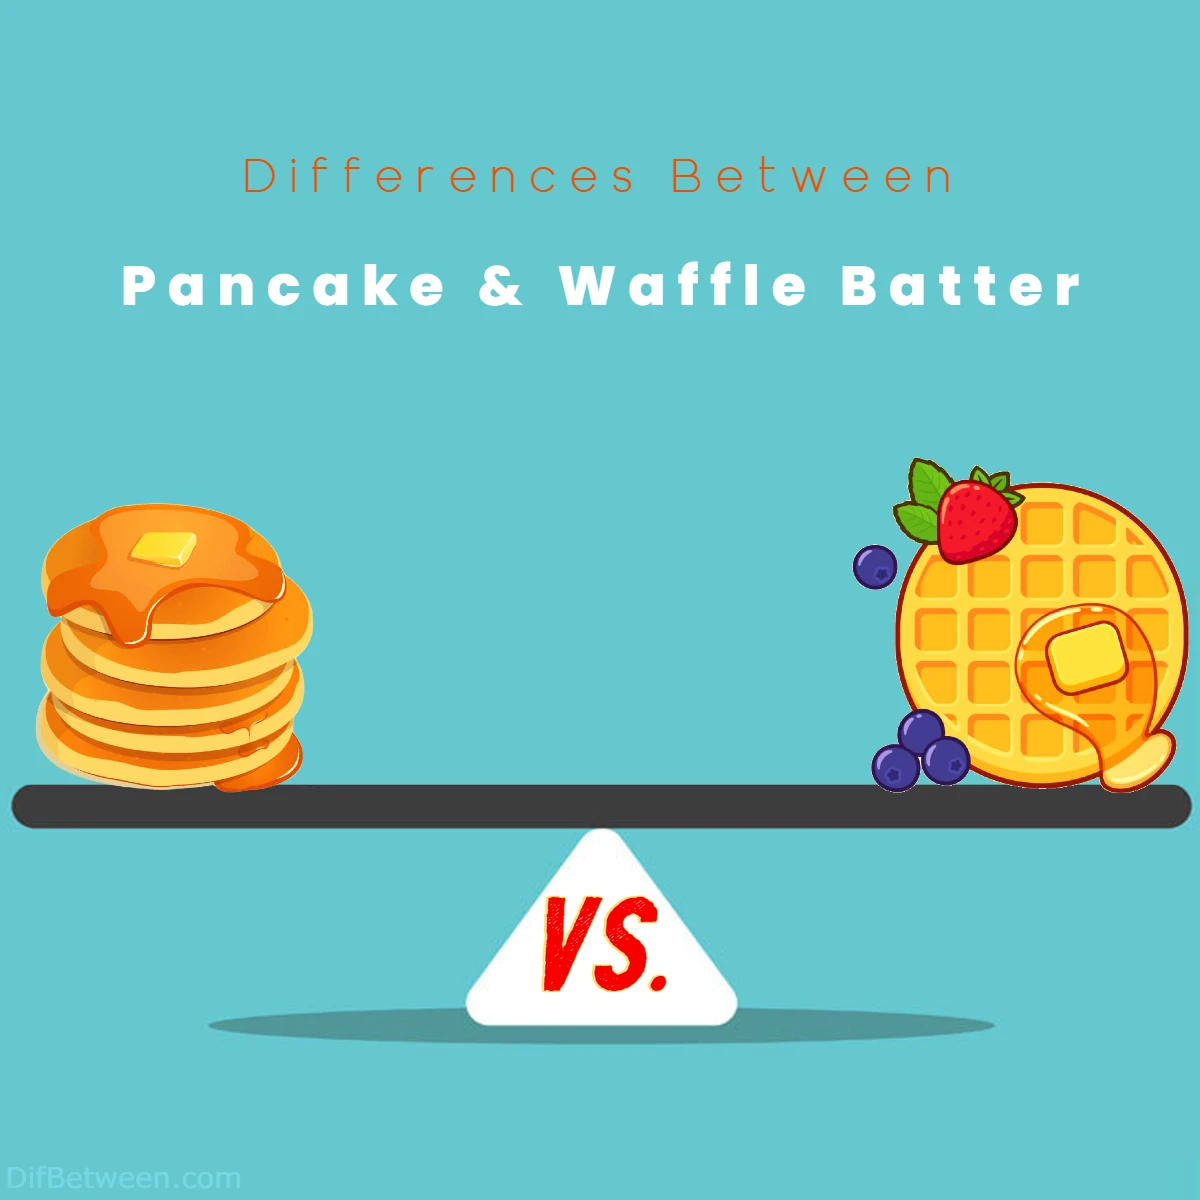 Differences Between Pancake and Waffle Batter